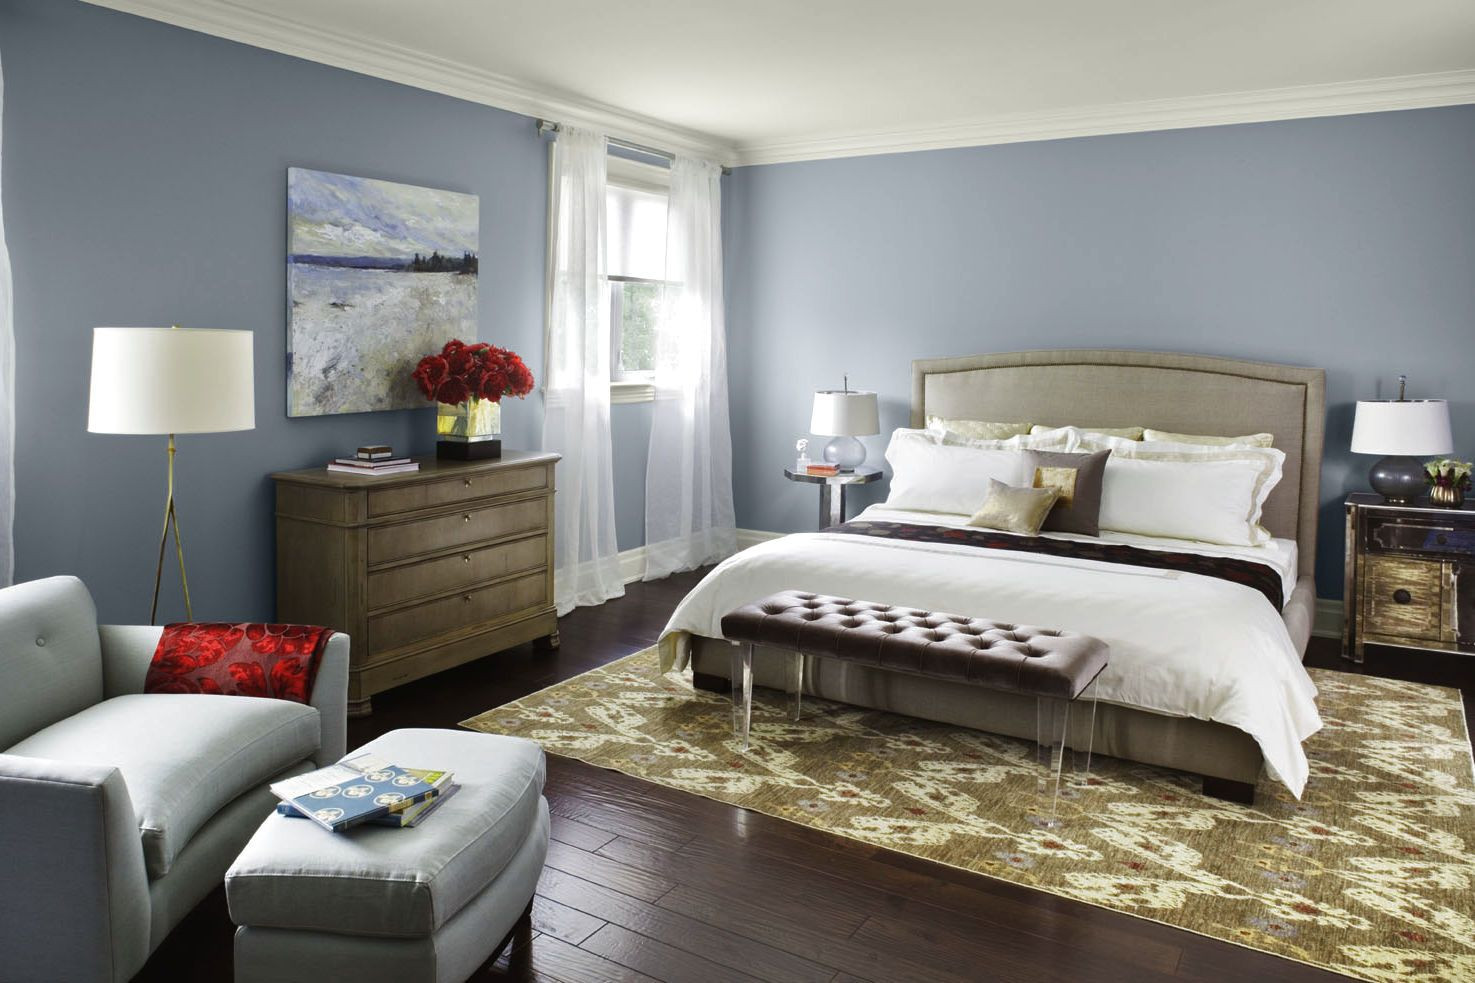 Best Paint Colors For Bedroom
 grey bedroom paint colors for traditional room with wide